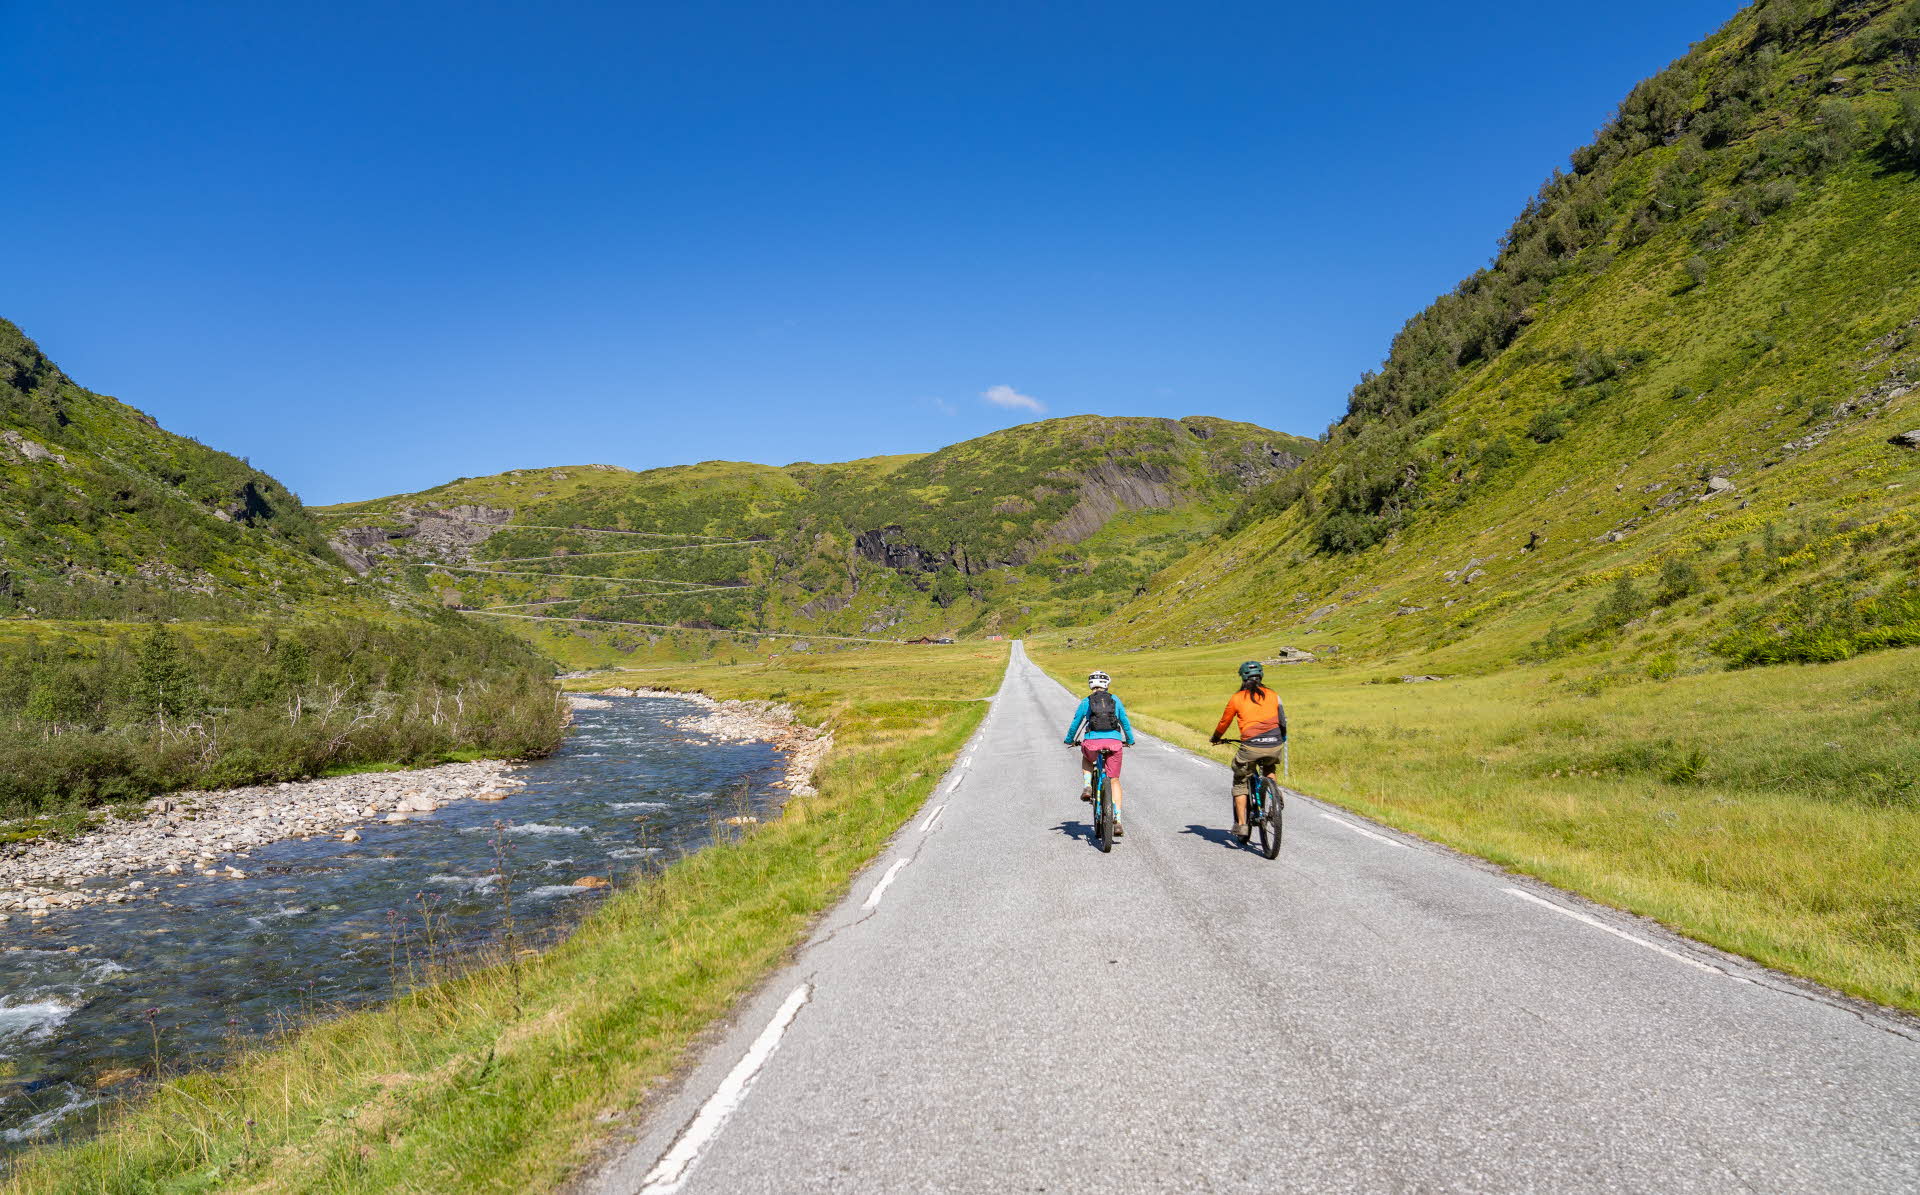 Two cyclists on a road by a river and steep, green mountains on every side.